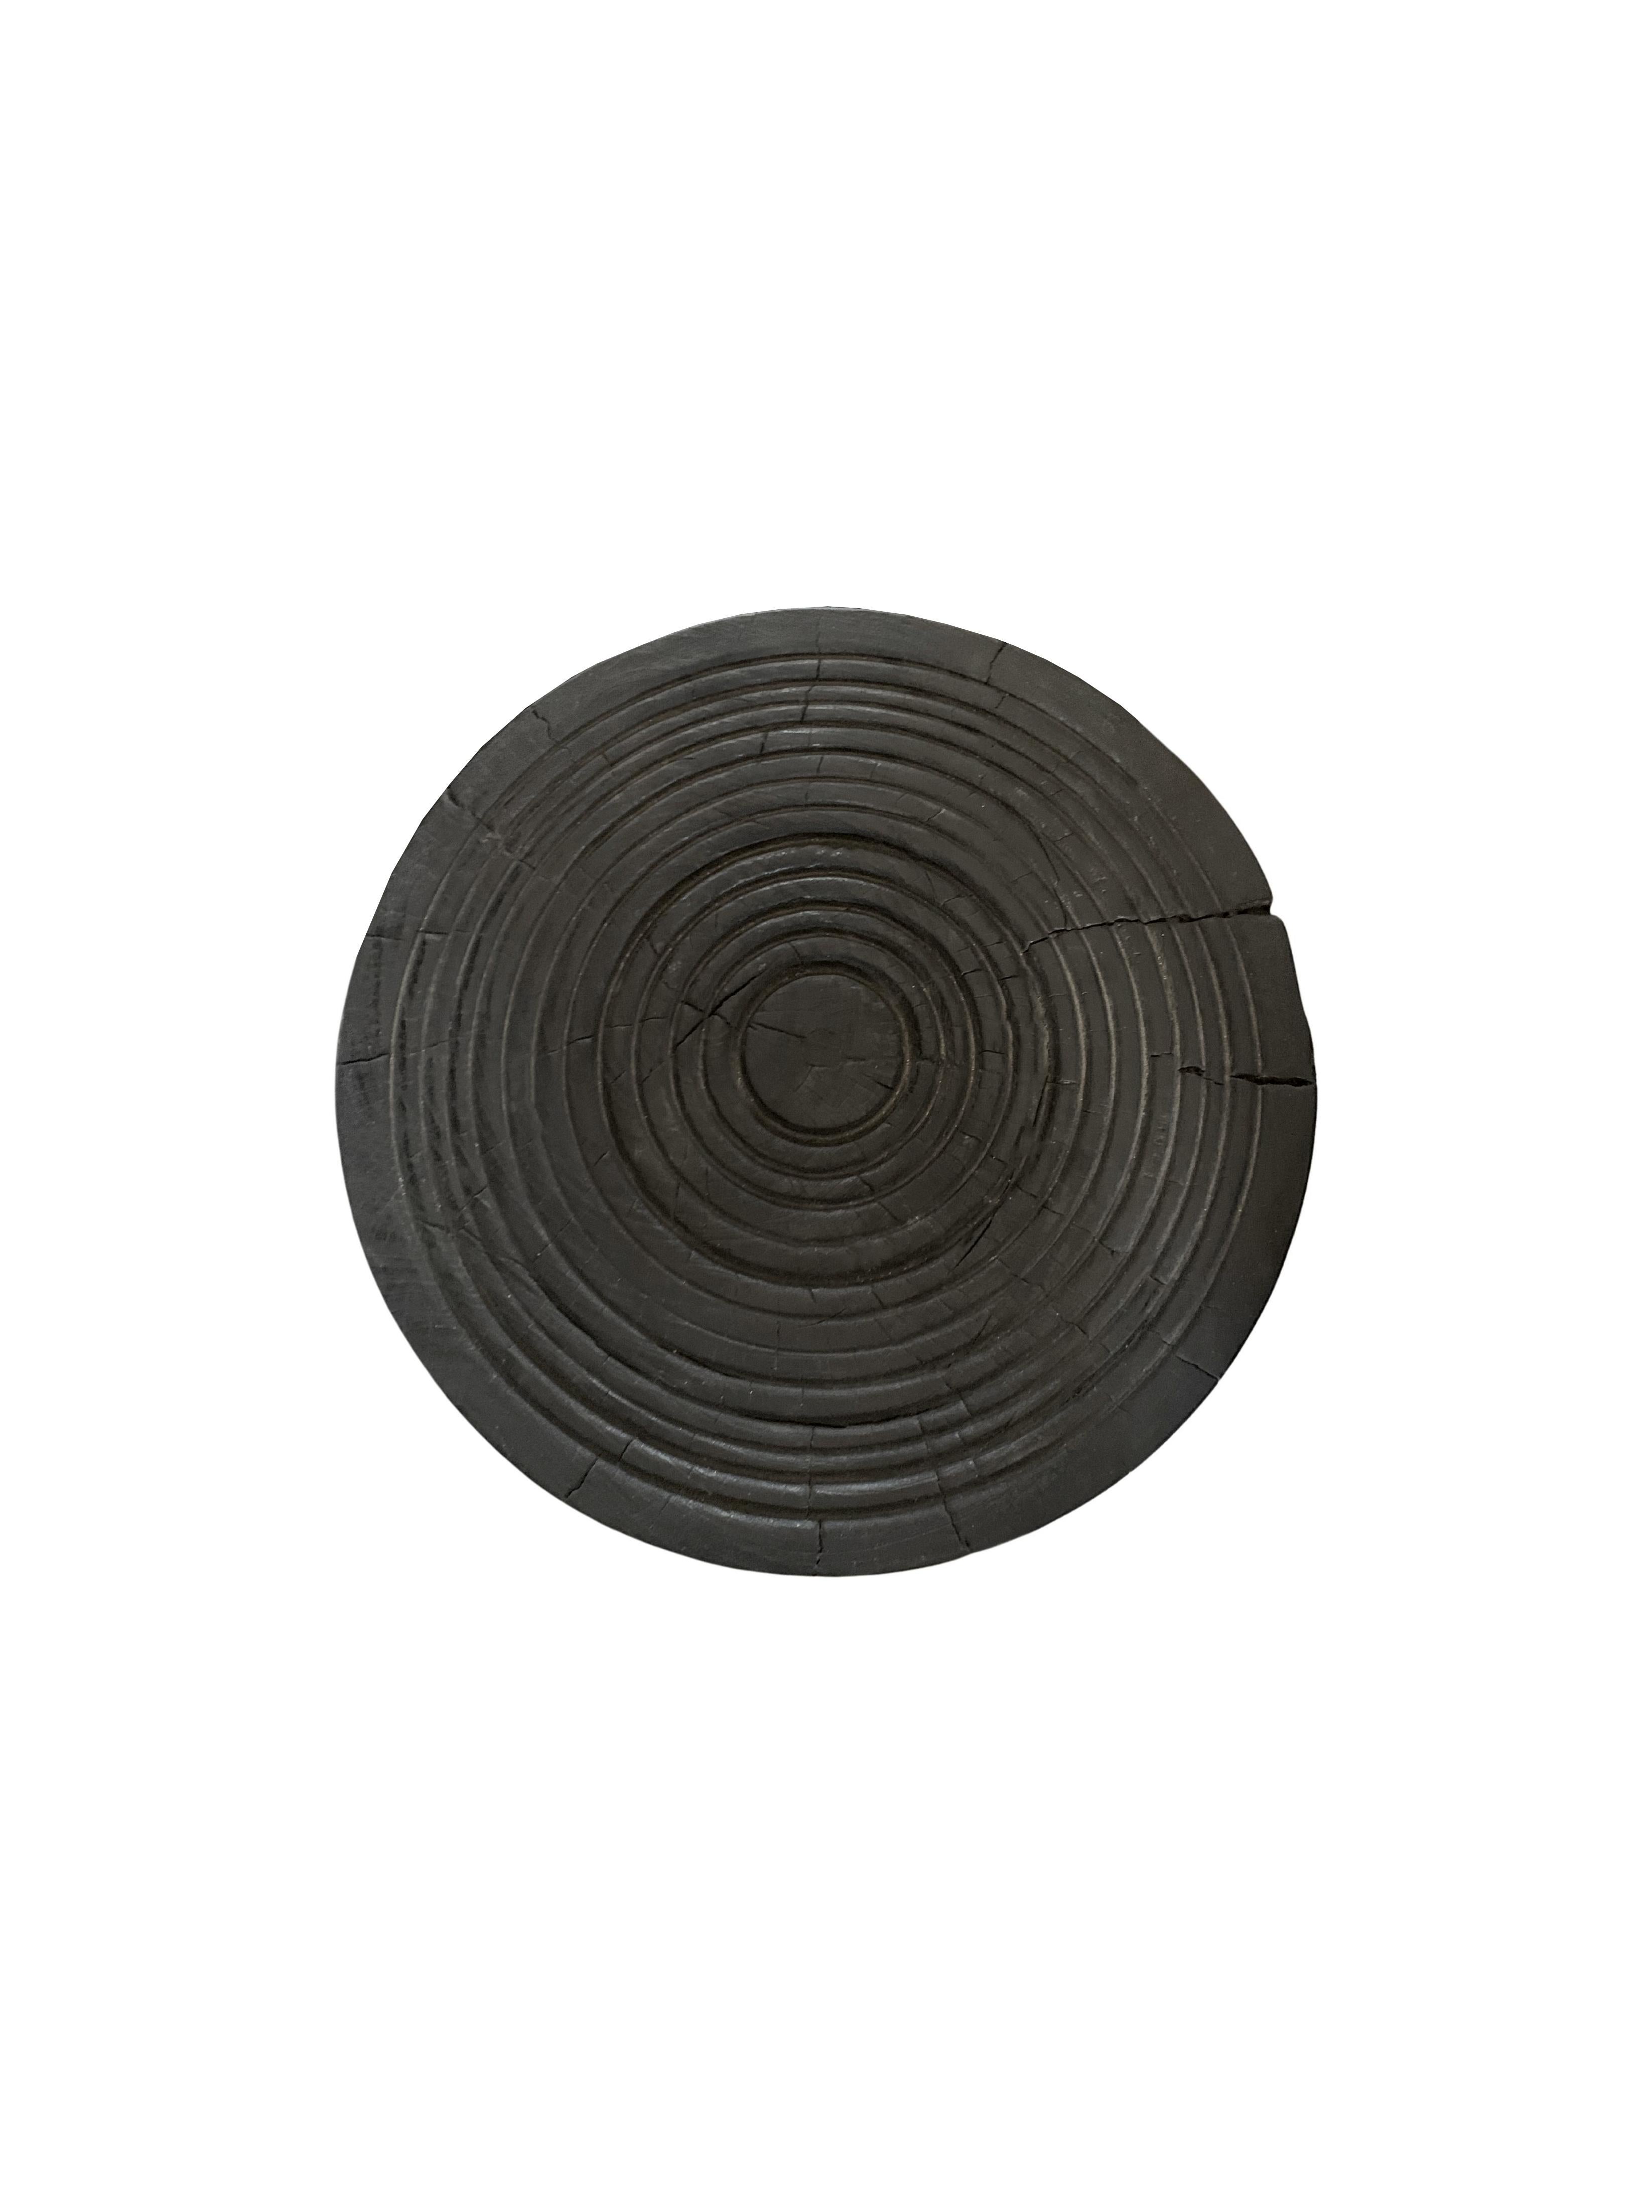 A wonderfully sculptural round side table with a hand-carved, ribbed design on its top side. Its rich black pigment was achieved through burning the wood three times. Its neutral pigment and subtle wood texture makes it perfect for any space. A